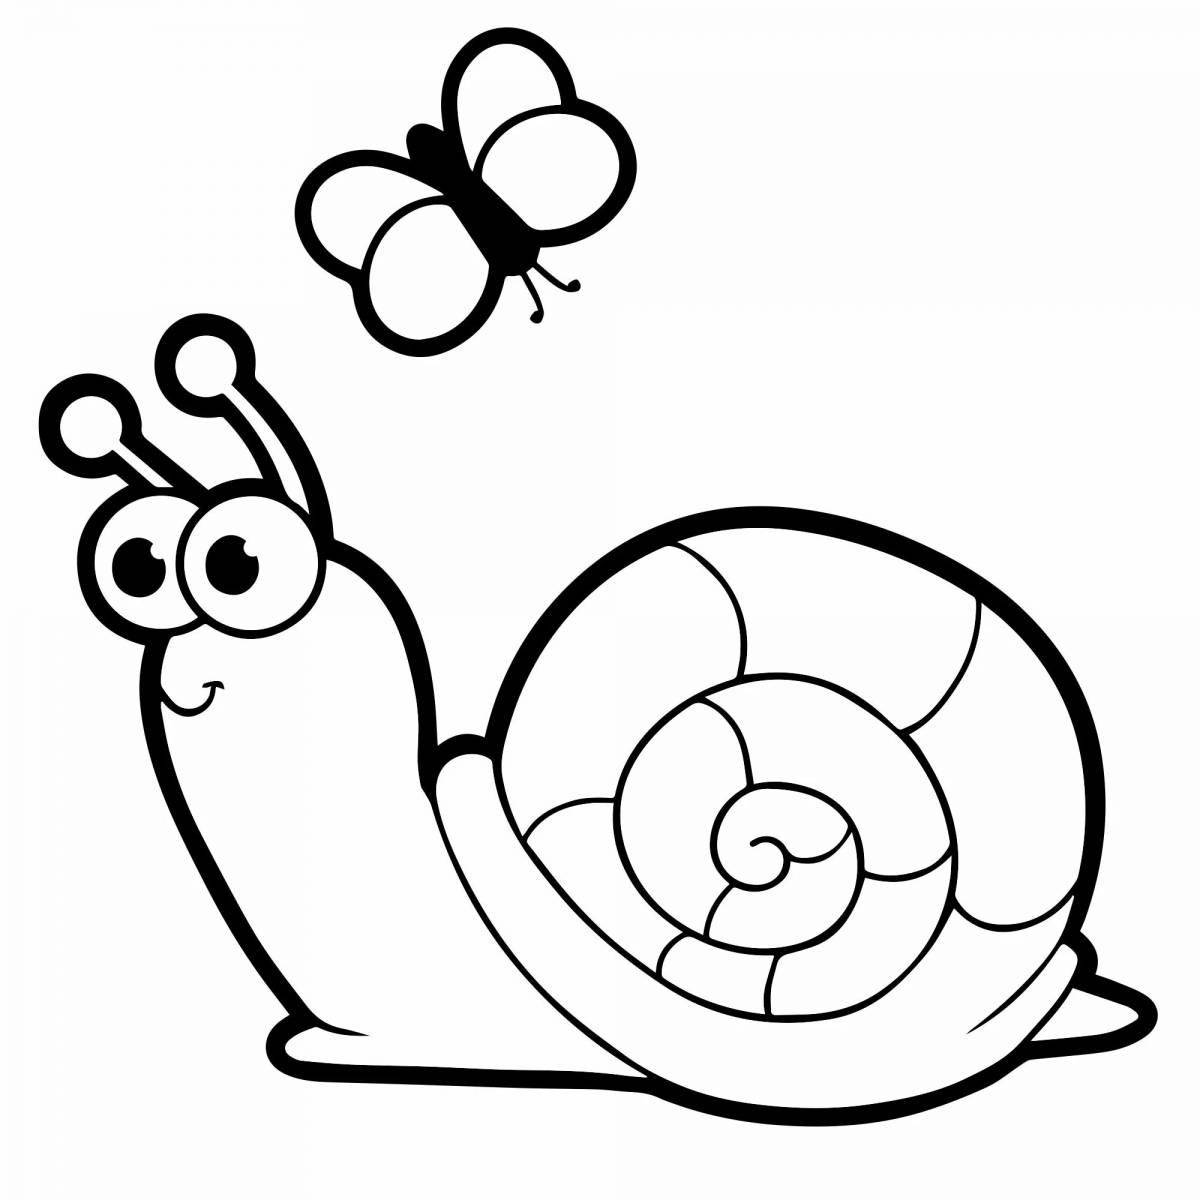 Snail drawing for kids #3